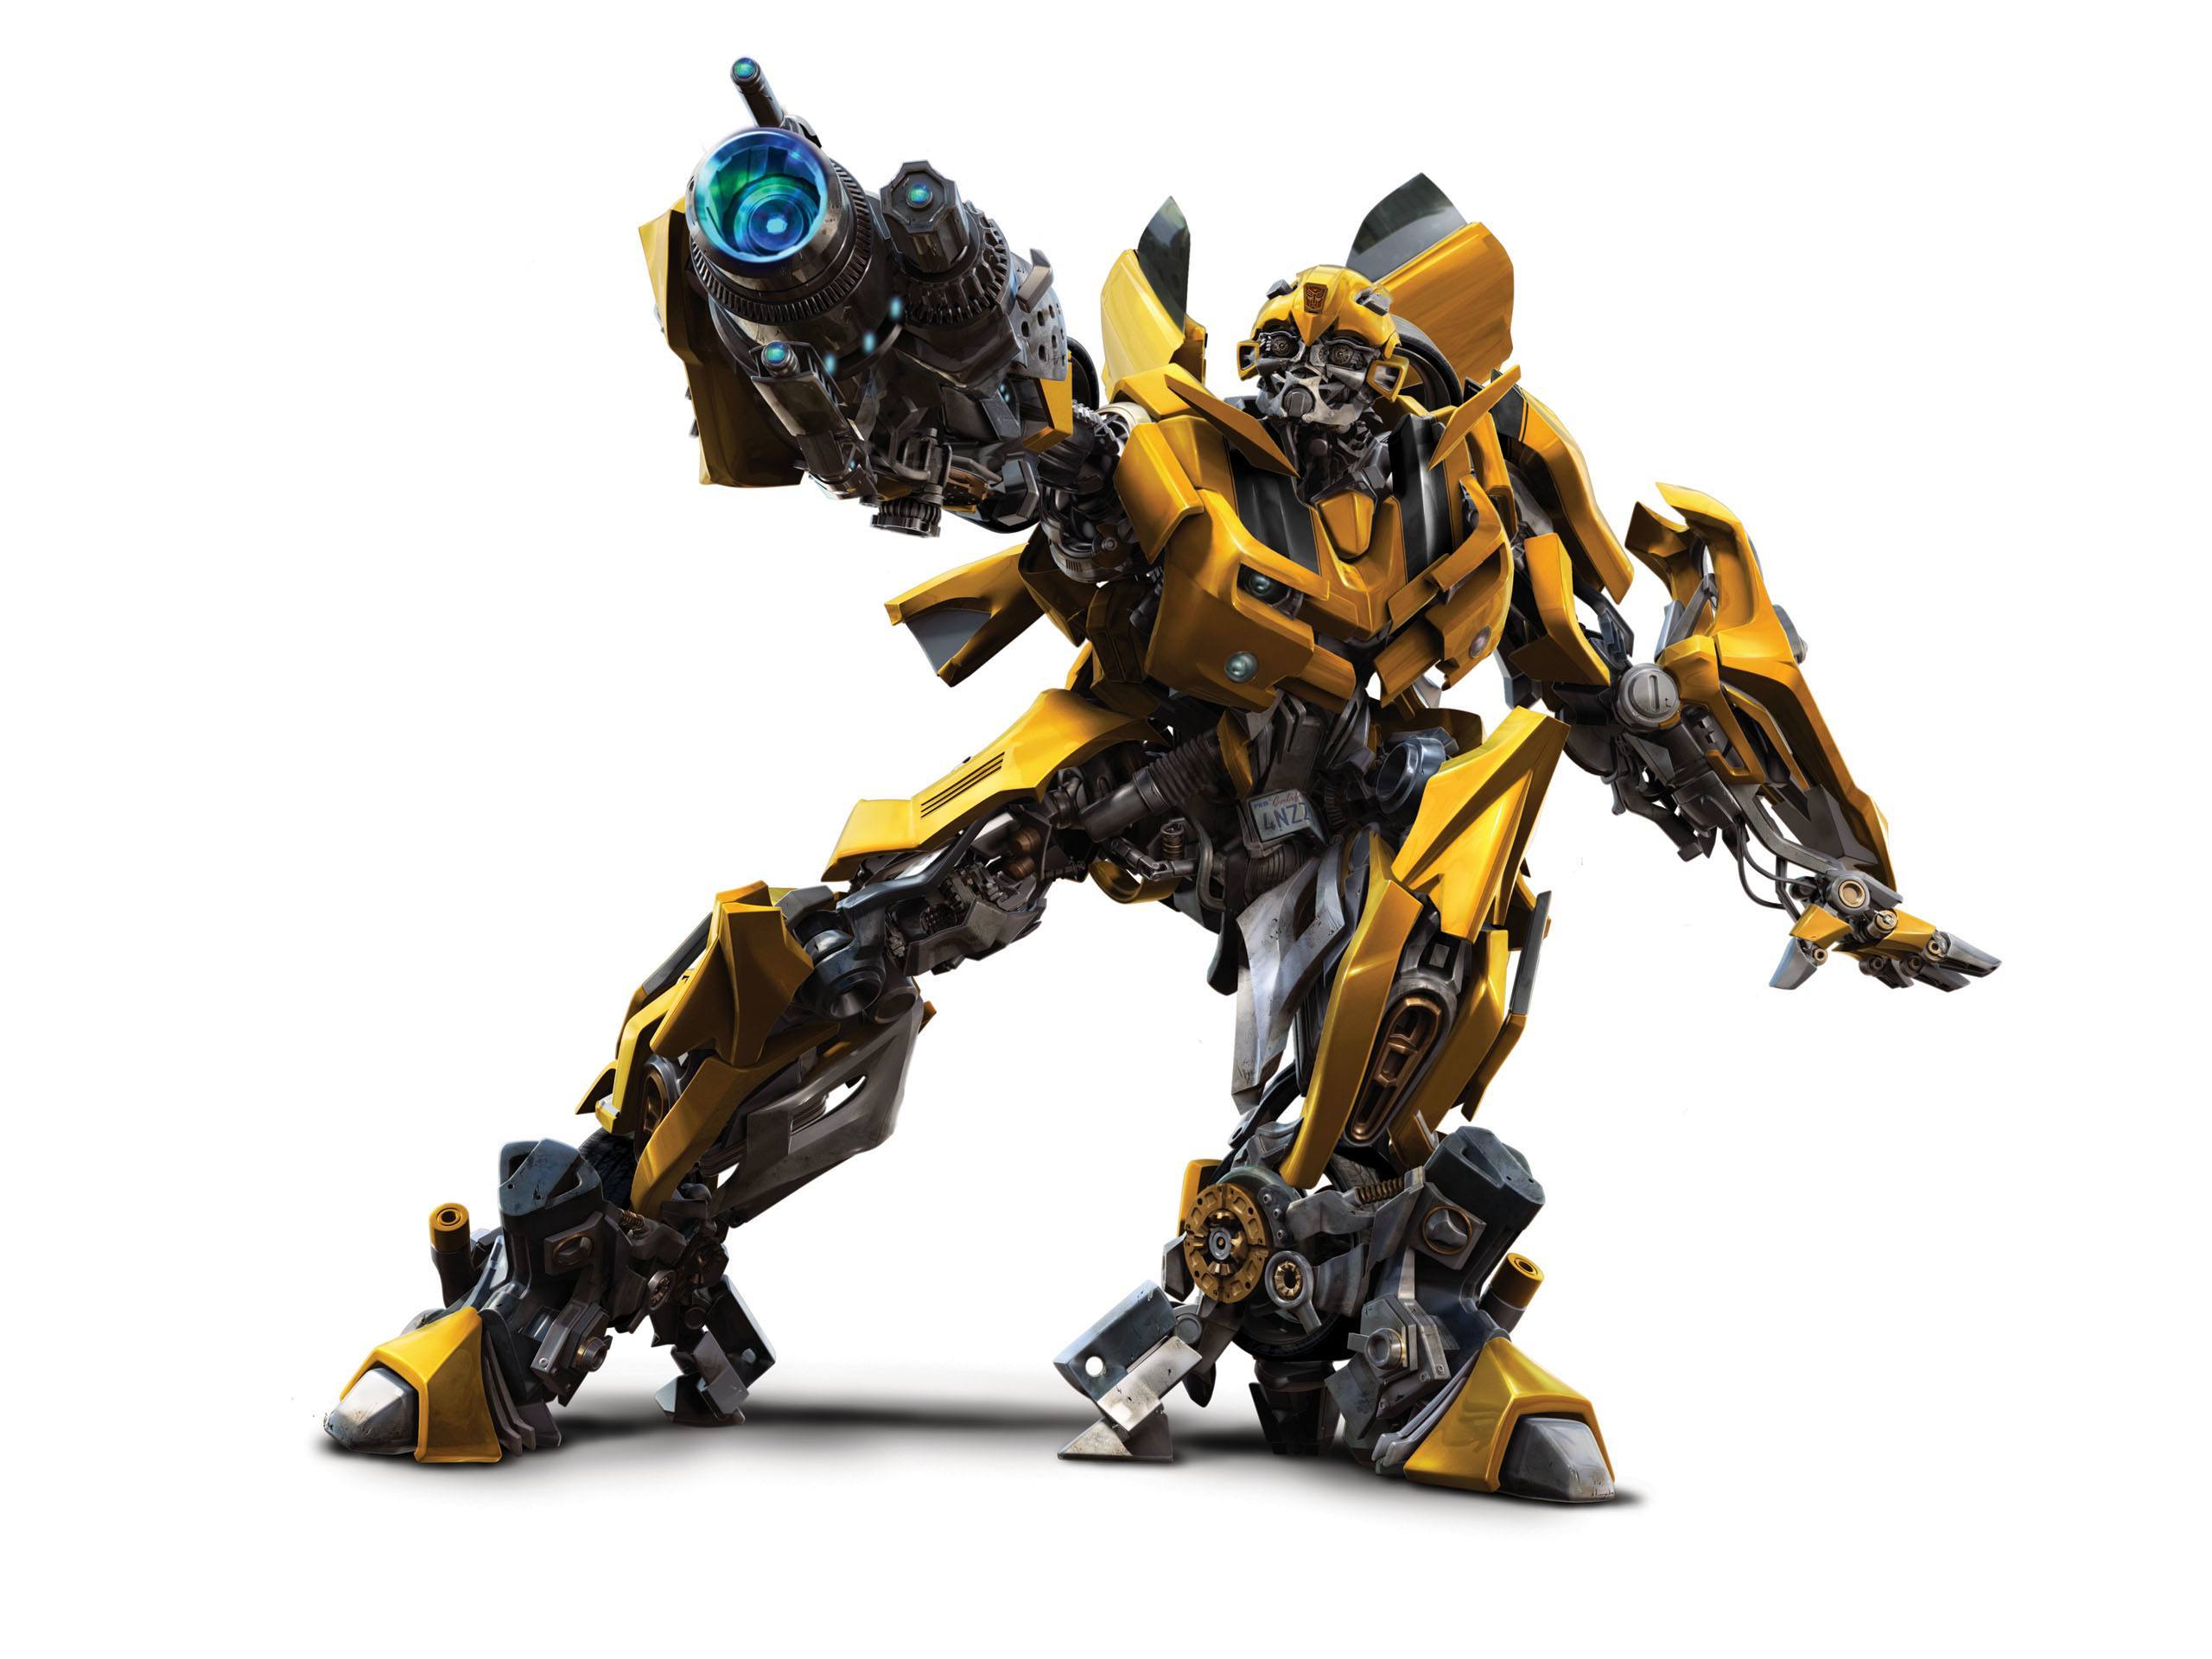 Transformers-bumble-bee